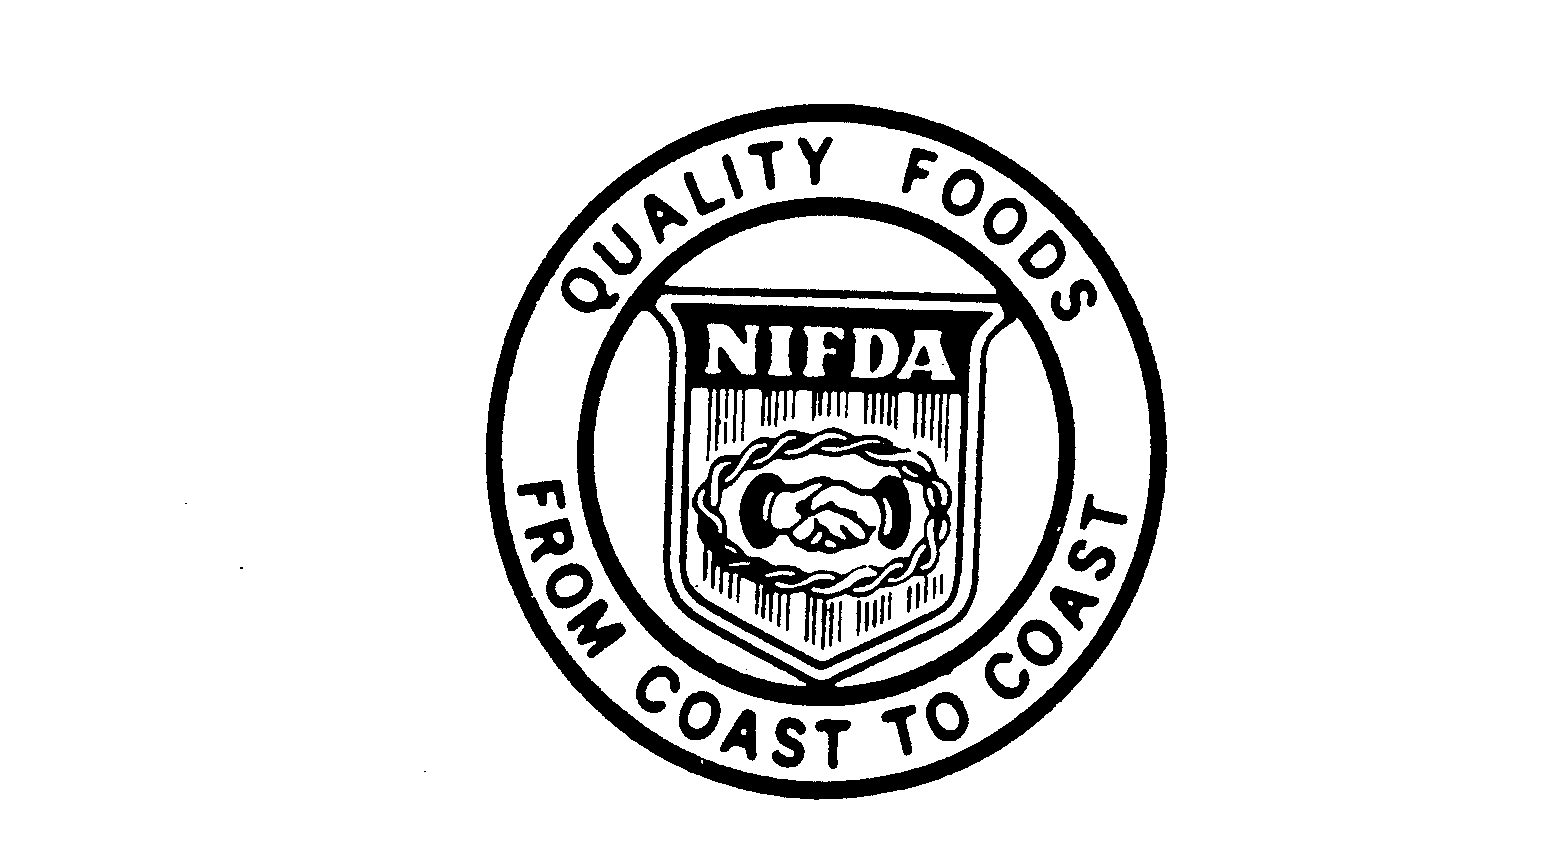  NIFDA QUALITY FOODS FROM COAST TO COAST